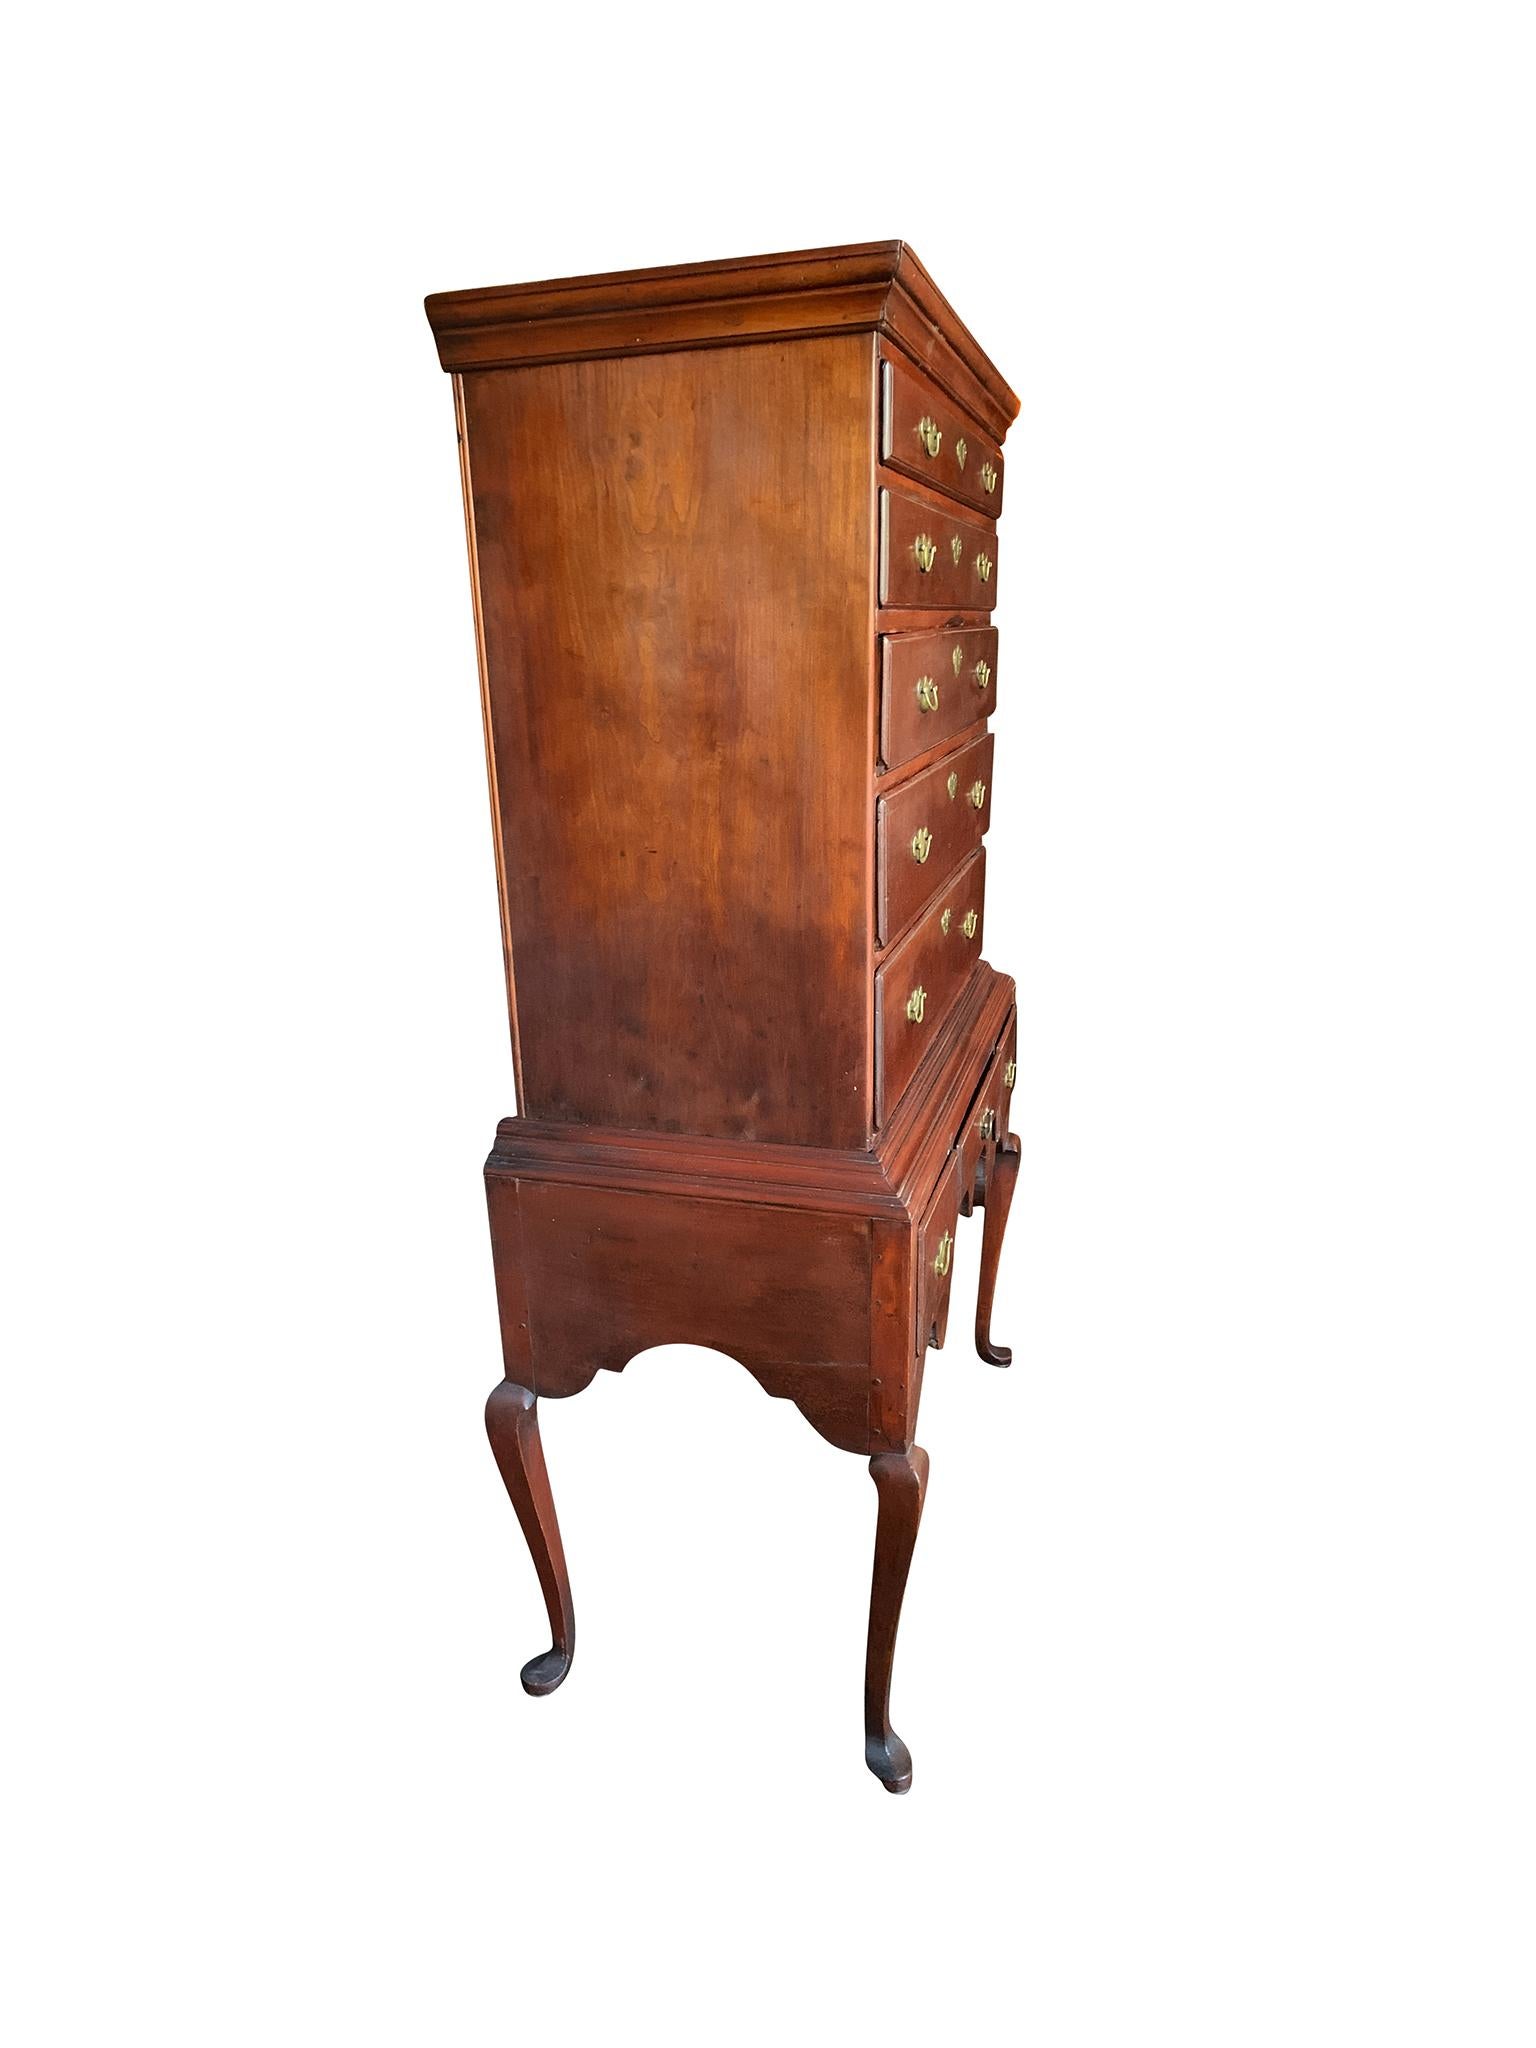 late 1700s highboy for sale by owner